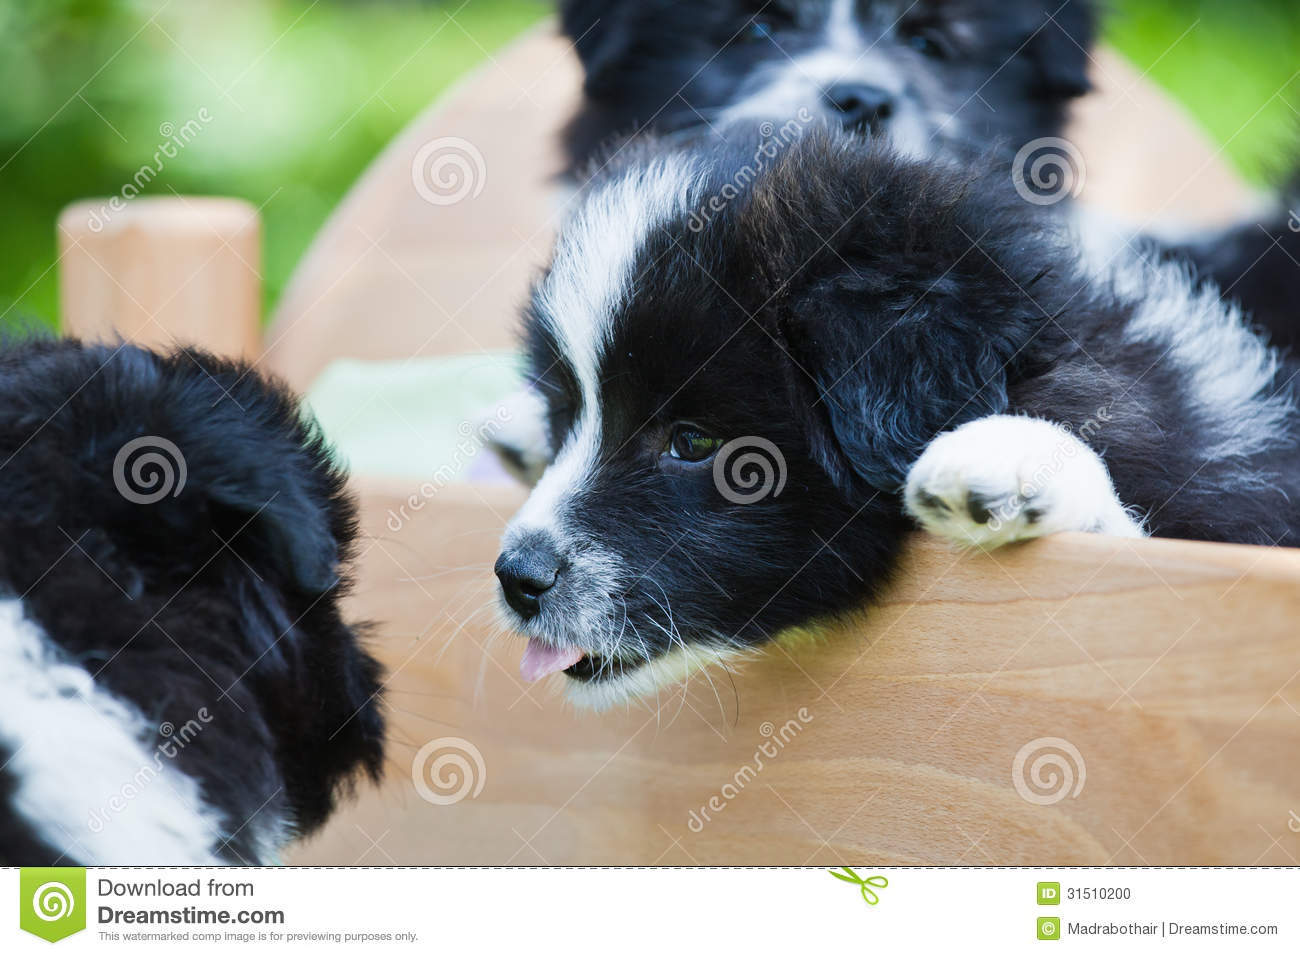 Elo Puppies: Elo Stock Funny Scene Puppies Elo German Dog Breed Where One Puppy Sticks Tongue Out 